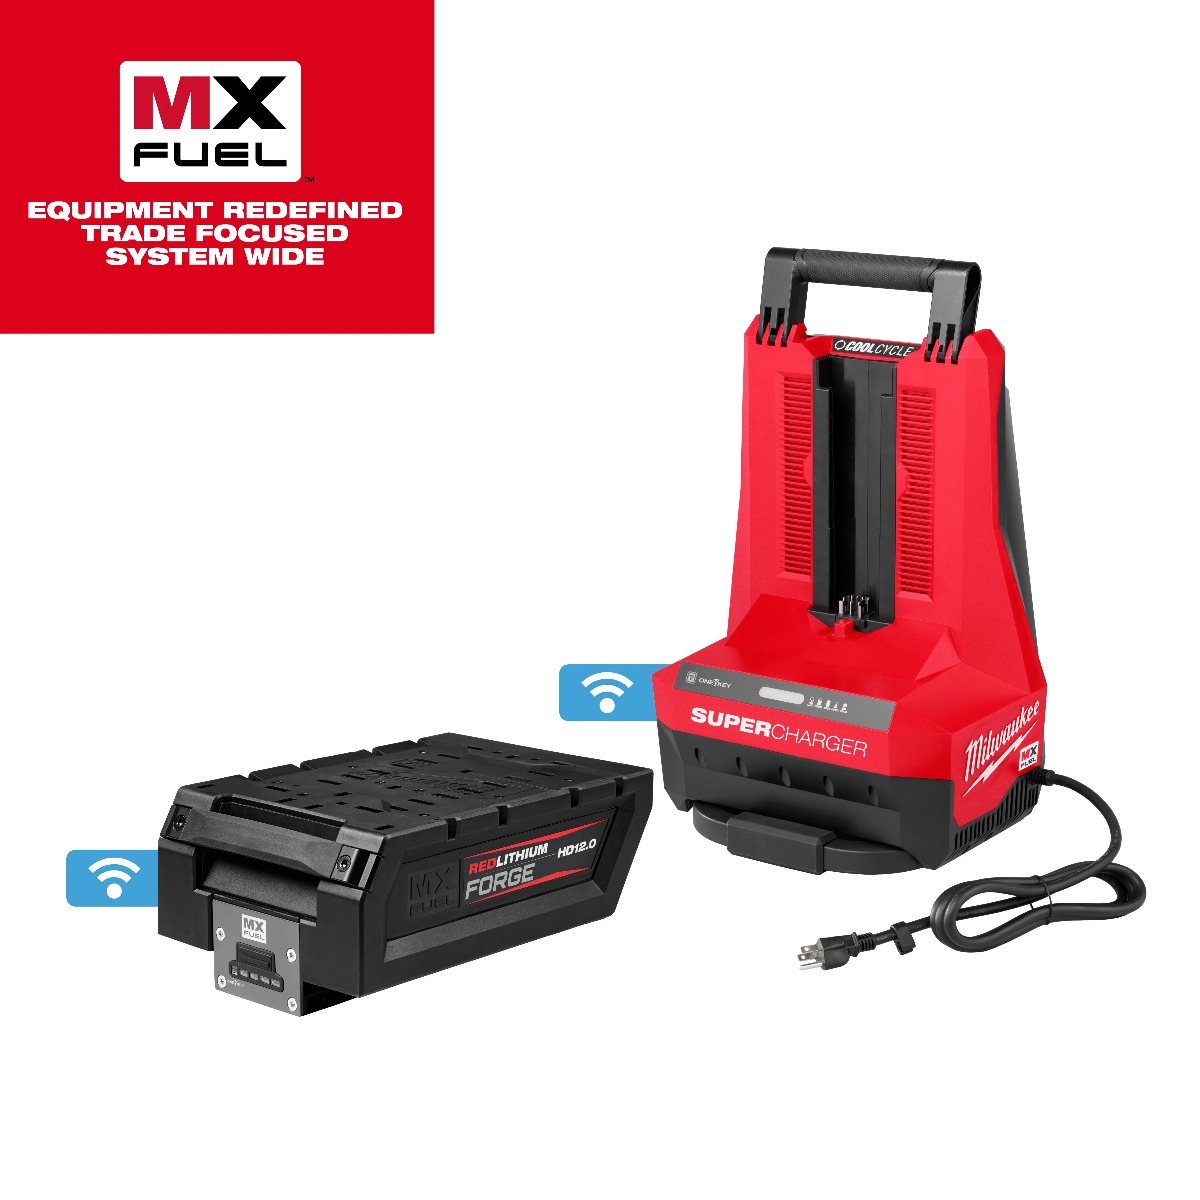 MX FUEL™ REDLITHIUM™ FORGE™ HD12.0 BATTERY/SUPER CHARGER EXPANSION KIT